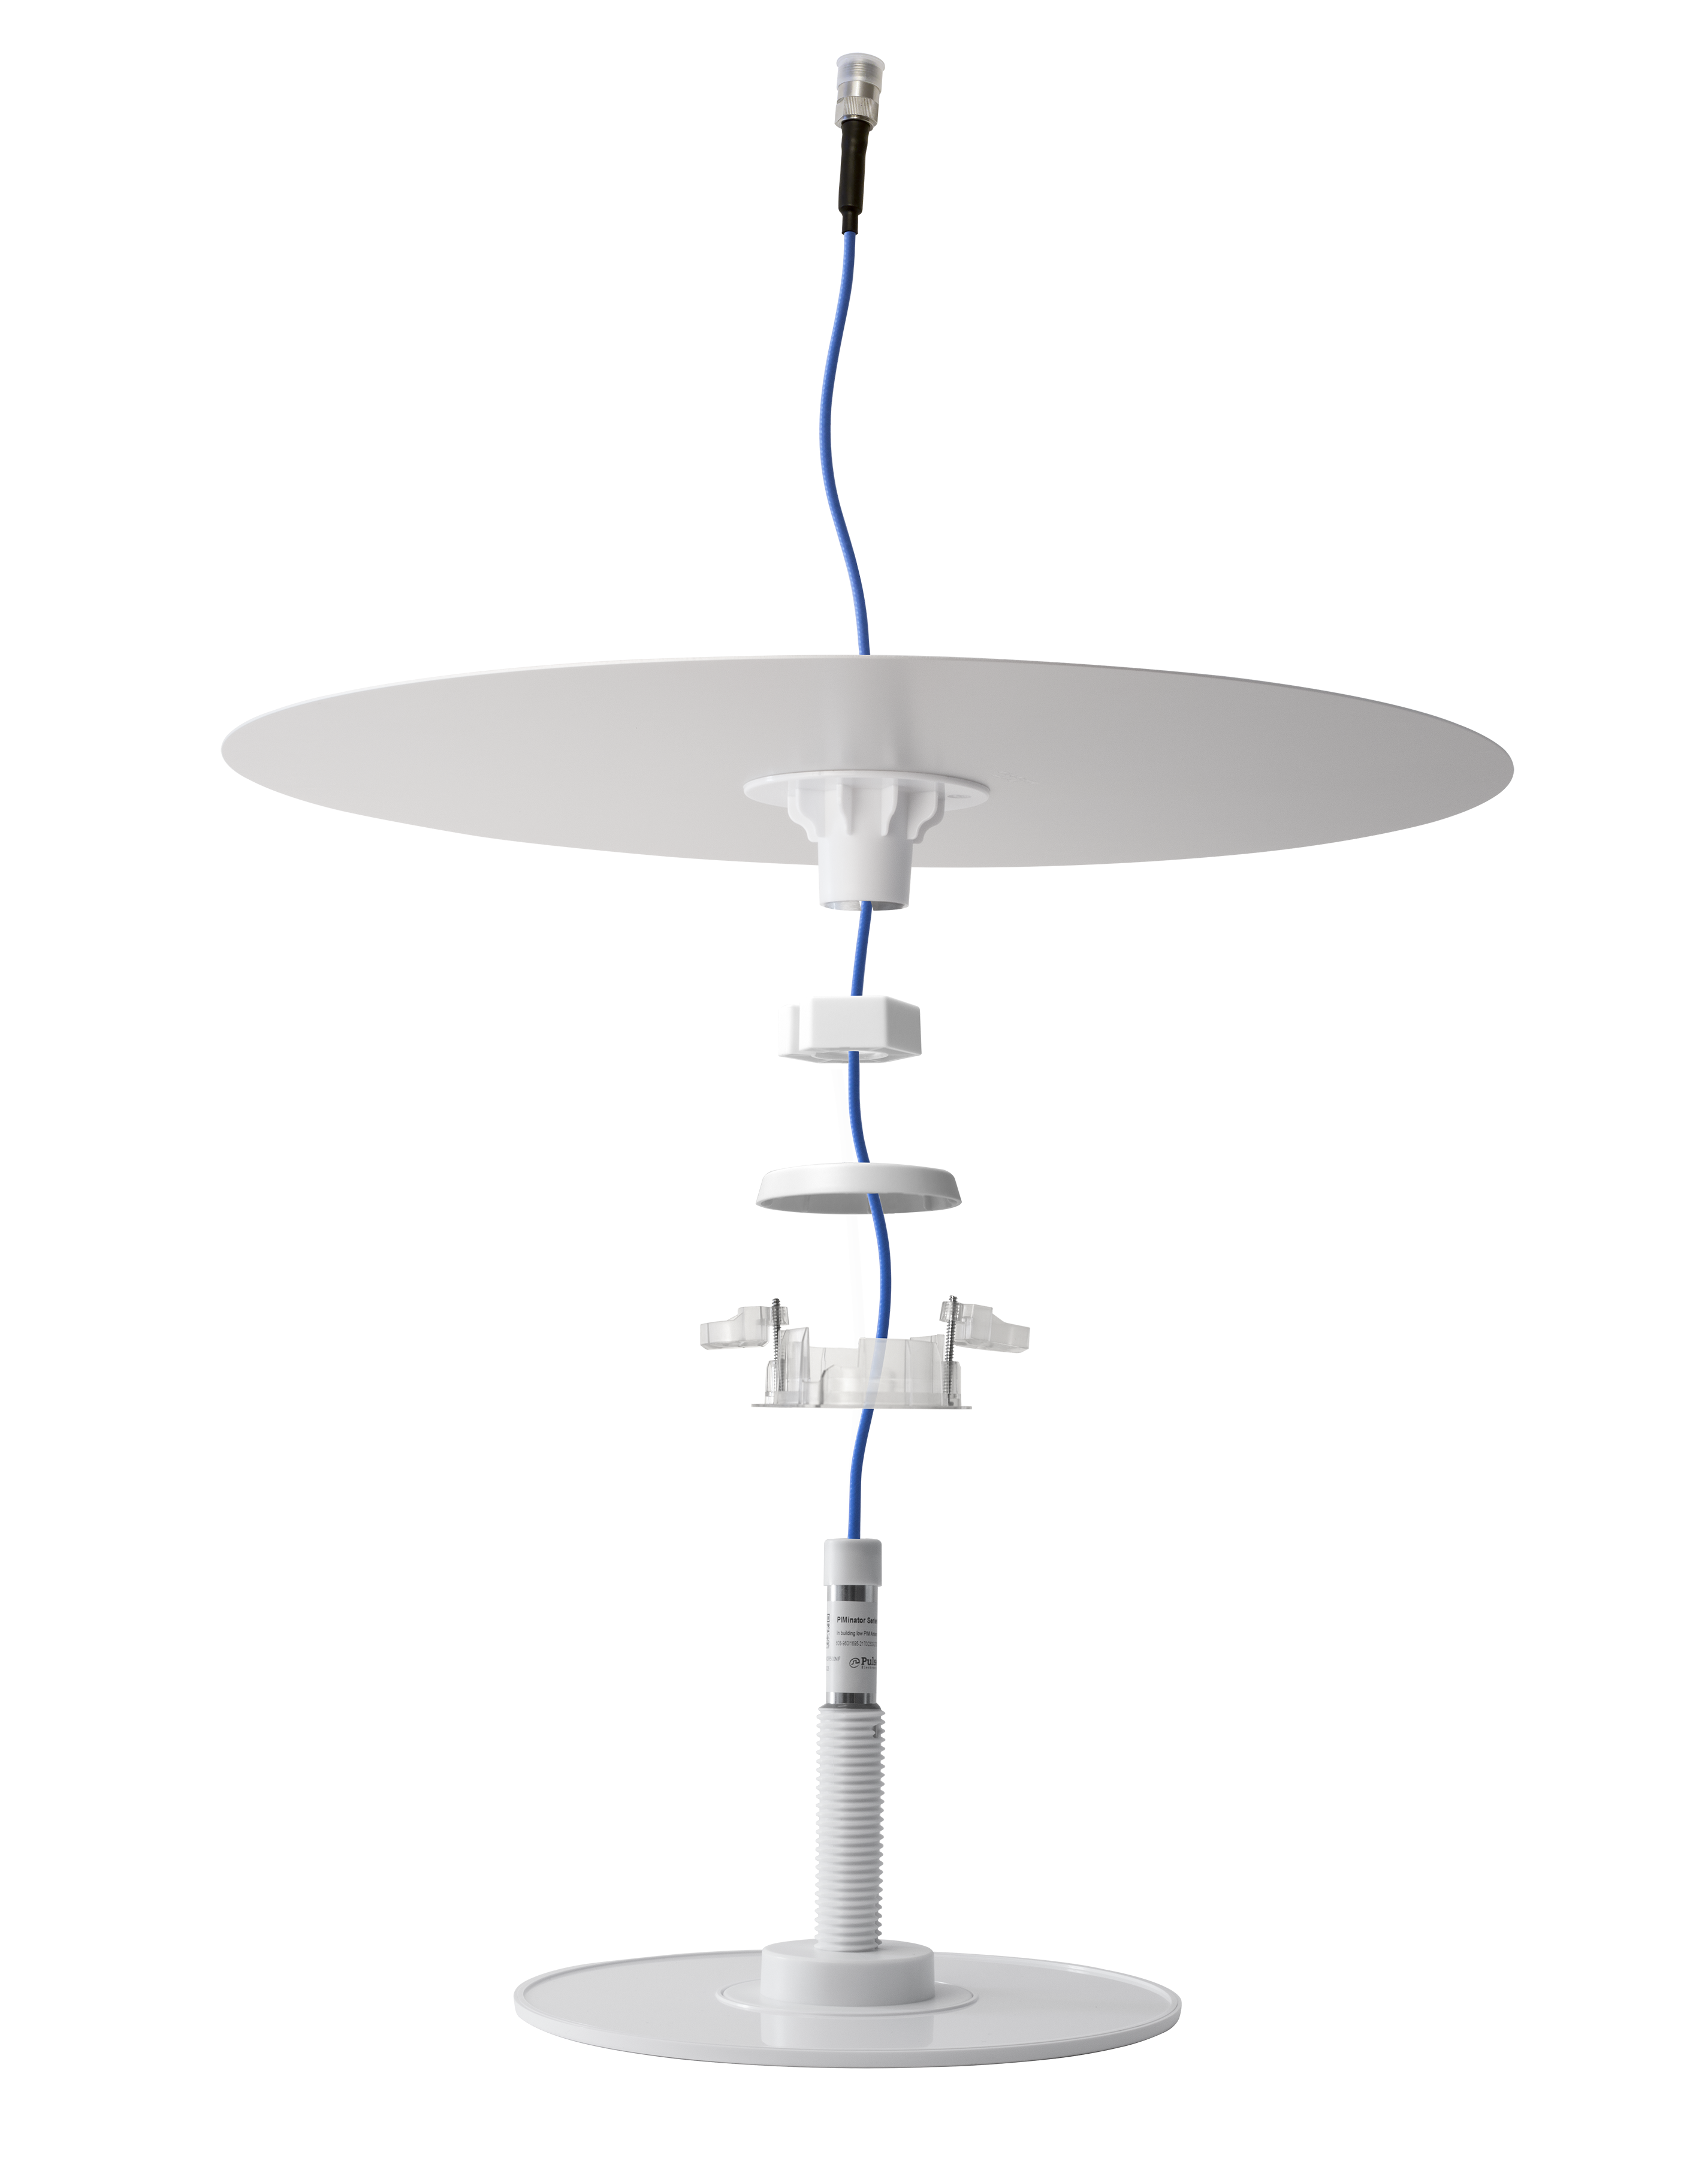 4g-low-profile-dome-antenna-314406